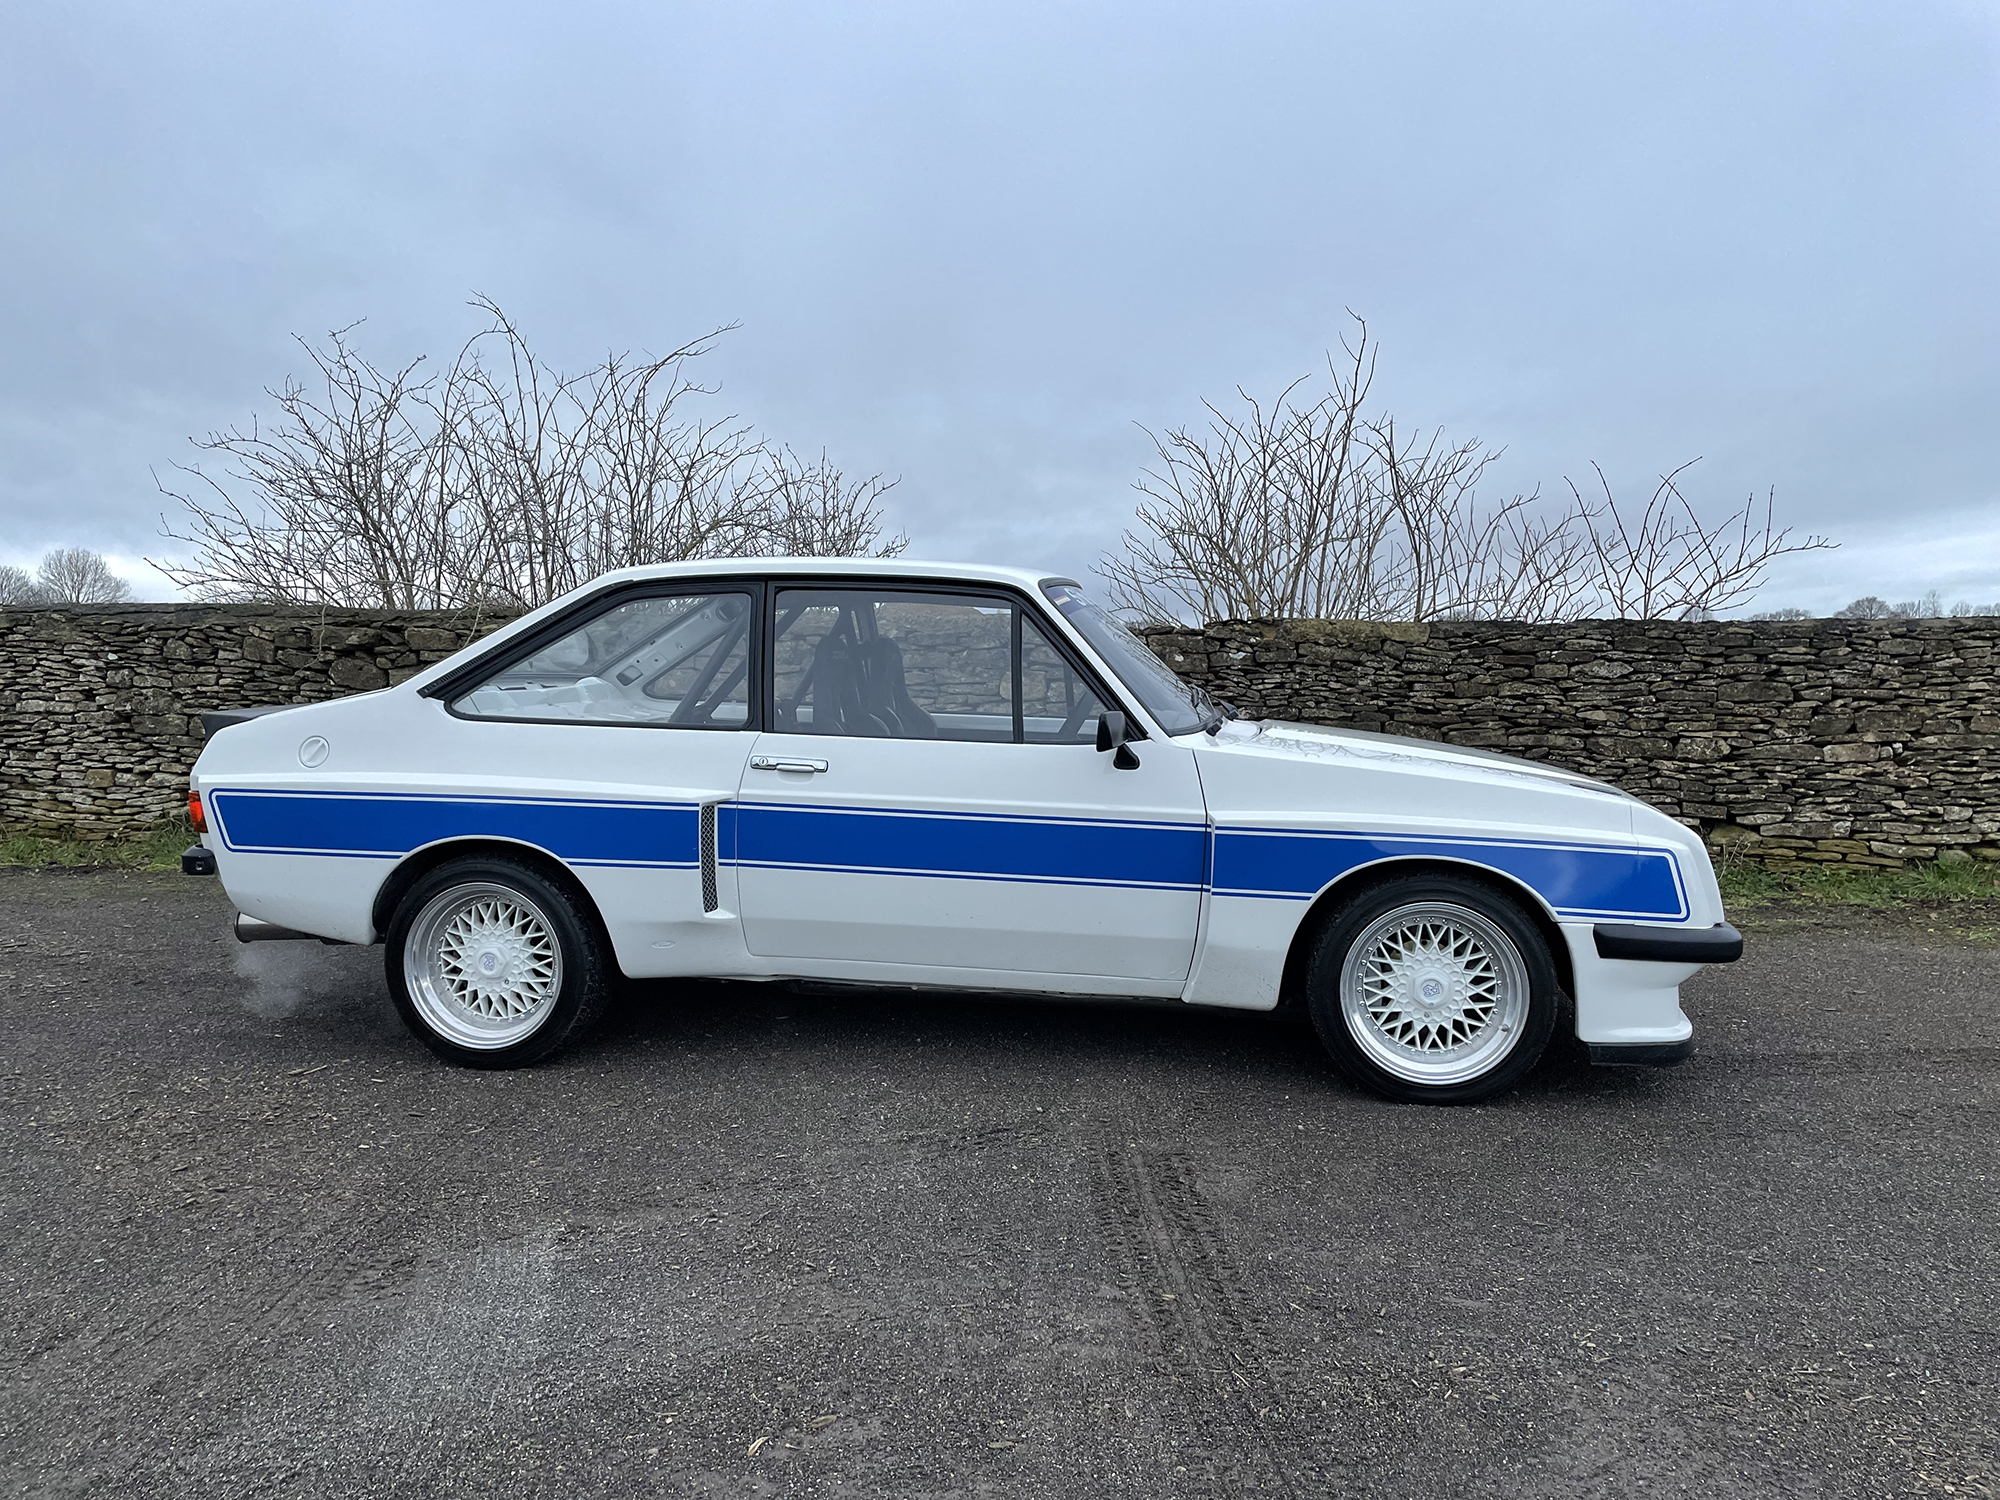 1980 Xpack Kitted Ford Escort Mk2 YB Cosworth Reg. no. DNL 188W Chassis no. BBATAA815570 - Image 3 of 28